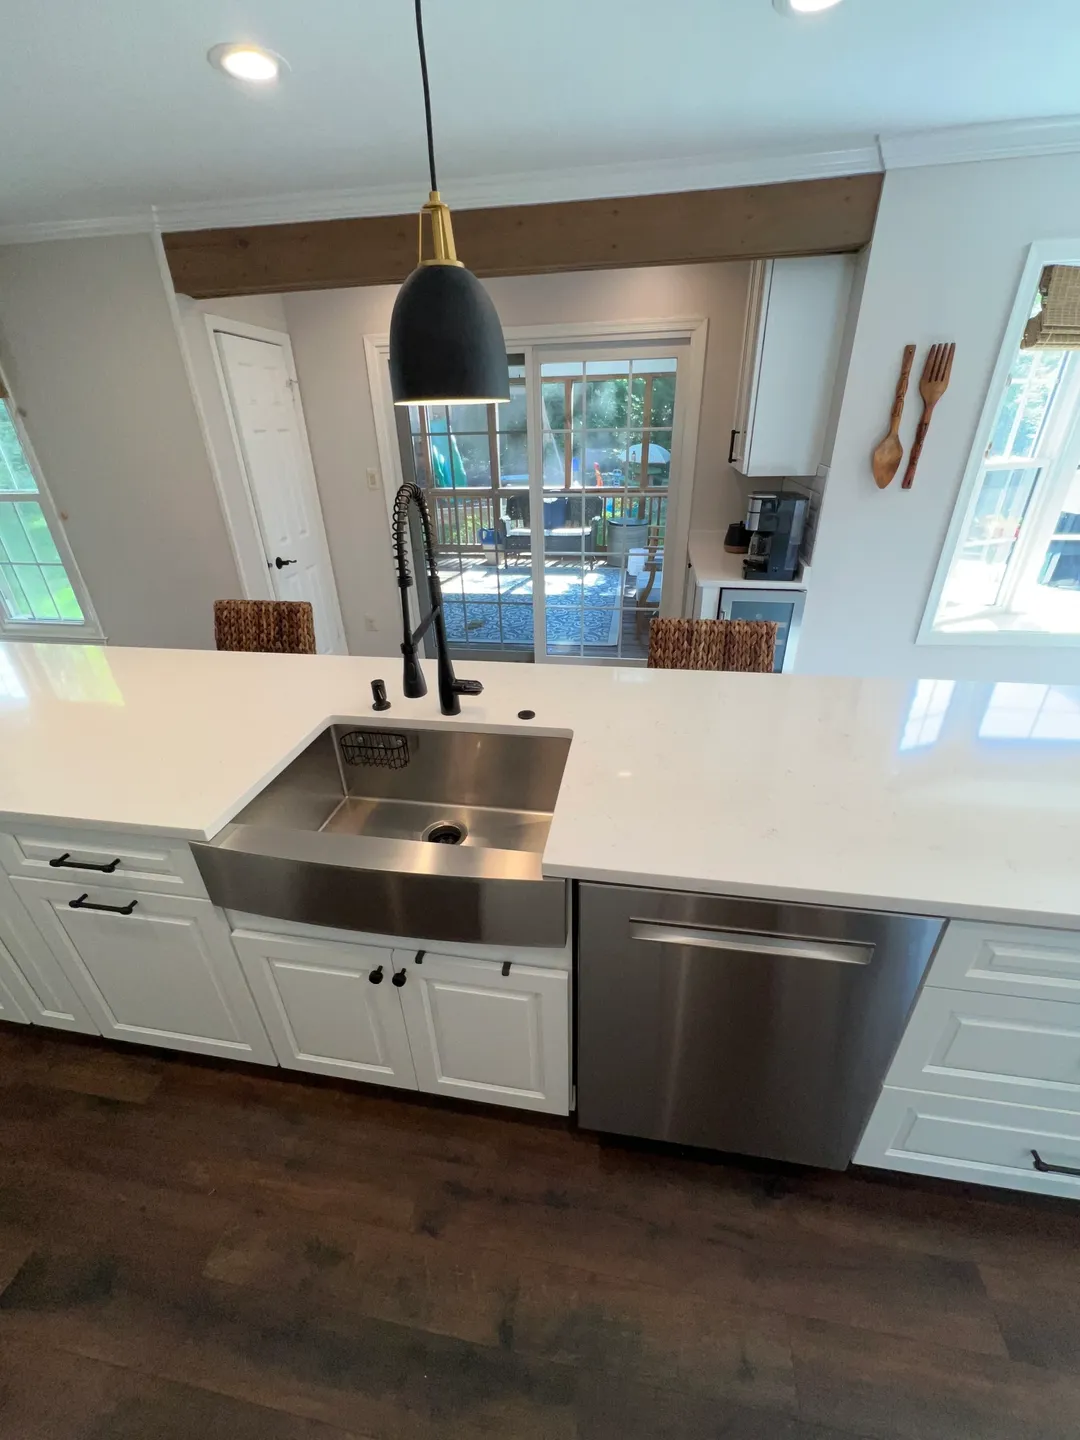 A kitchen with white counters and stainless steel sink.